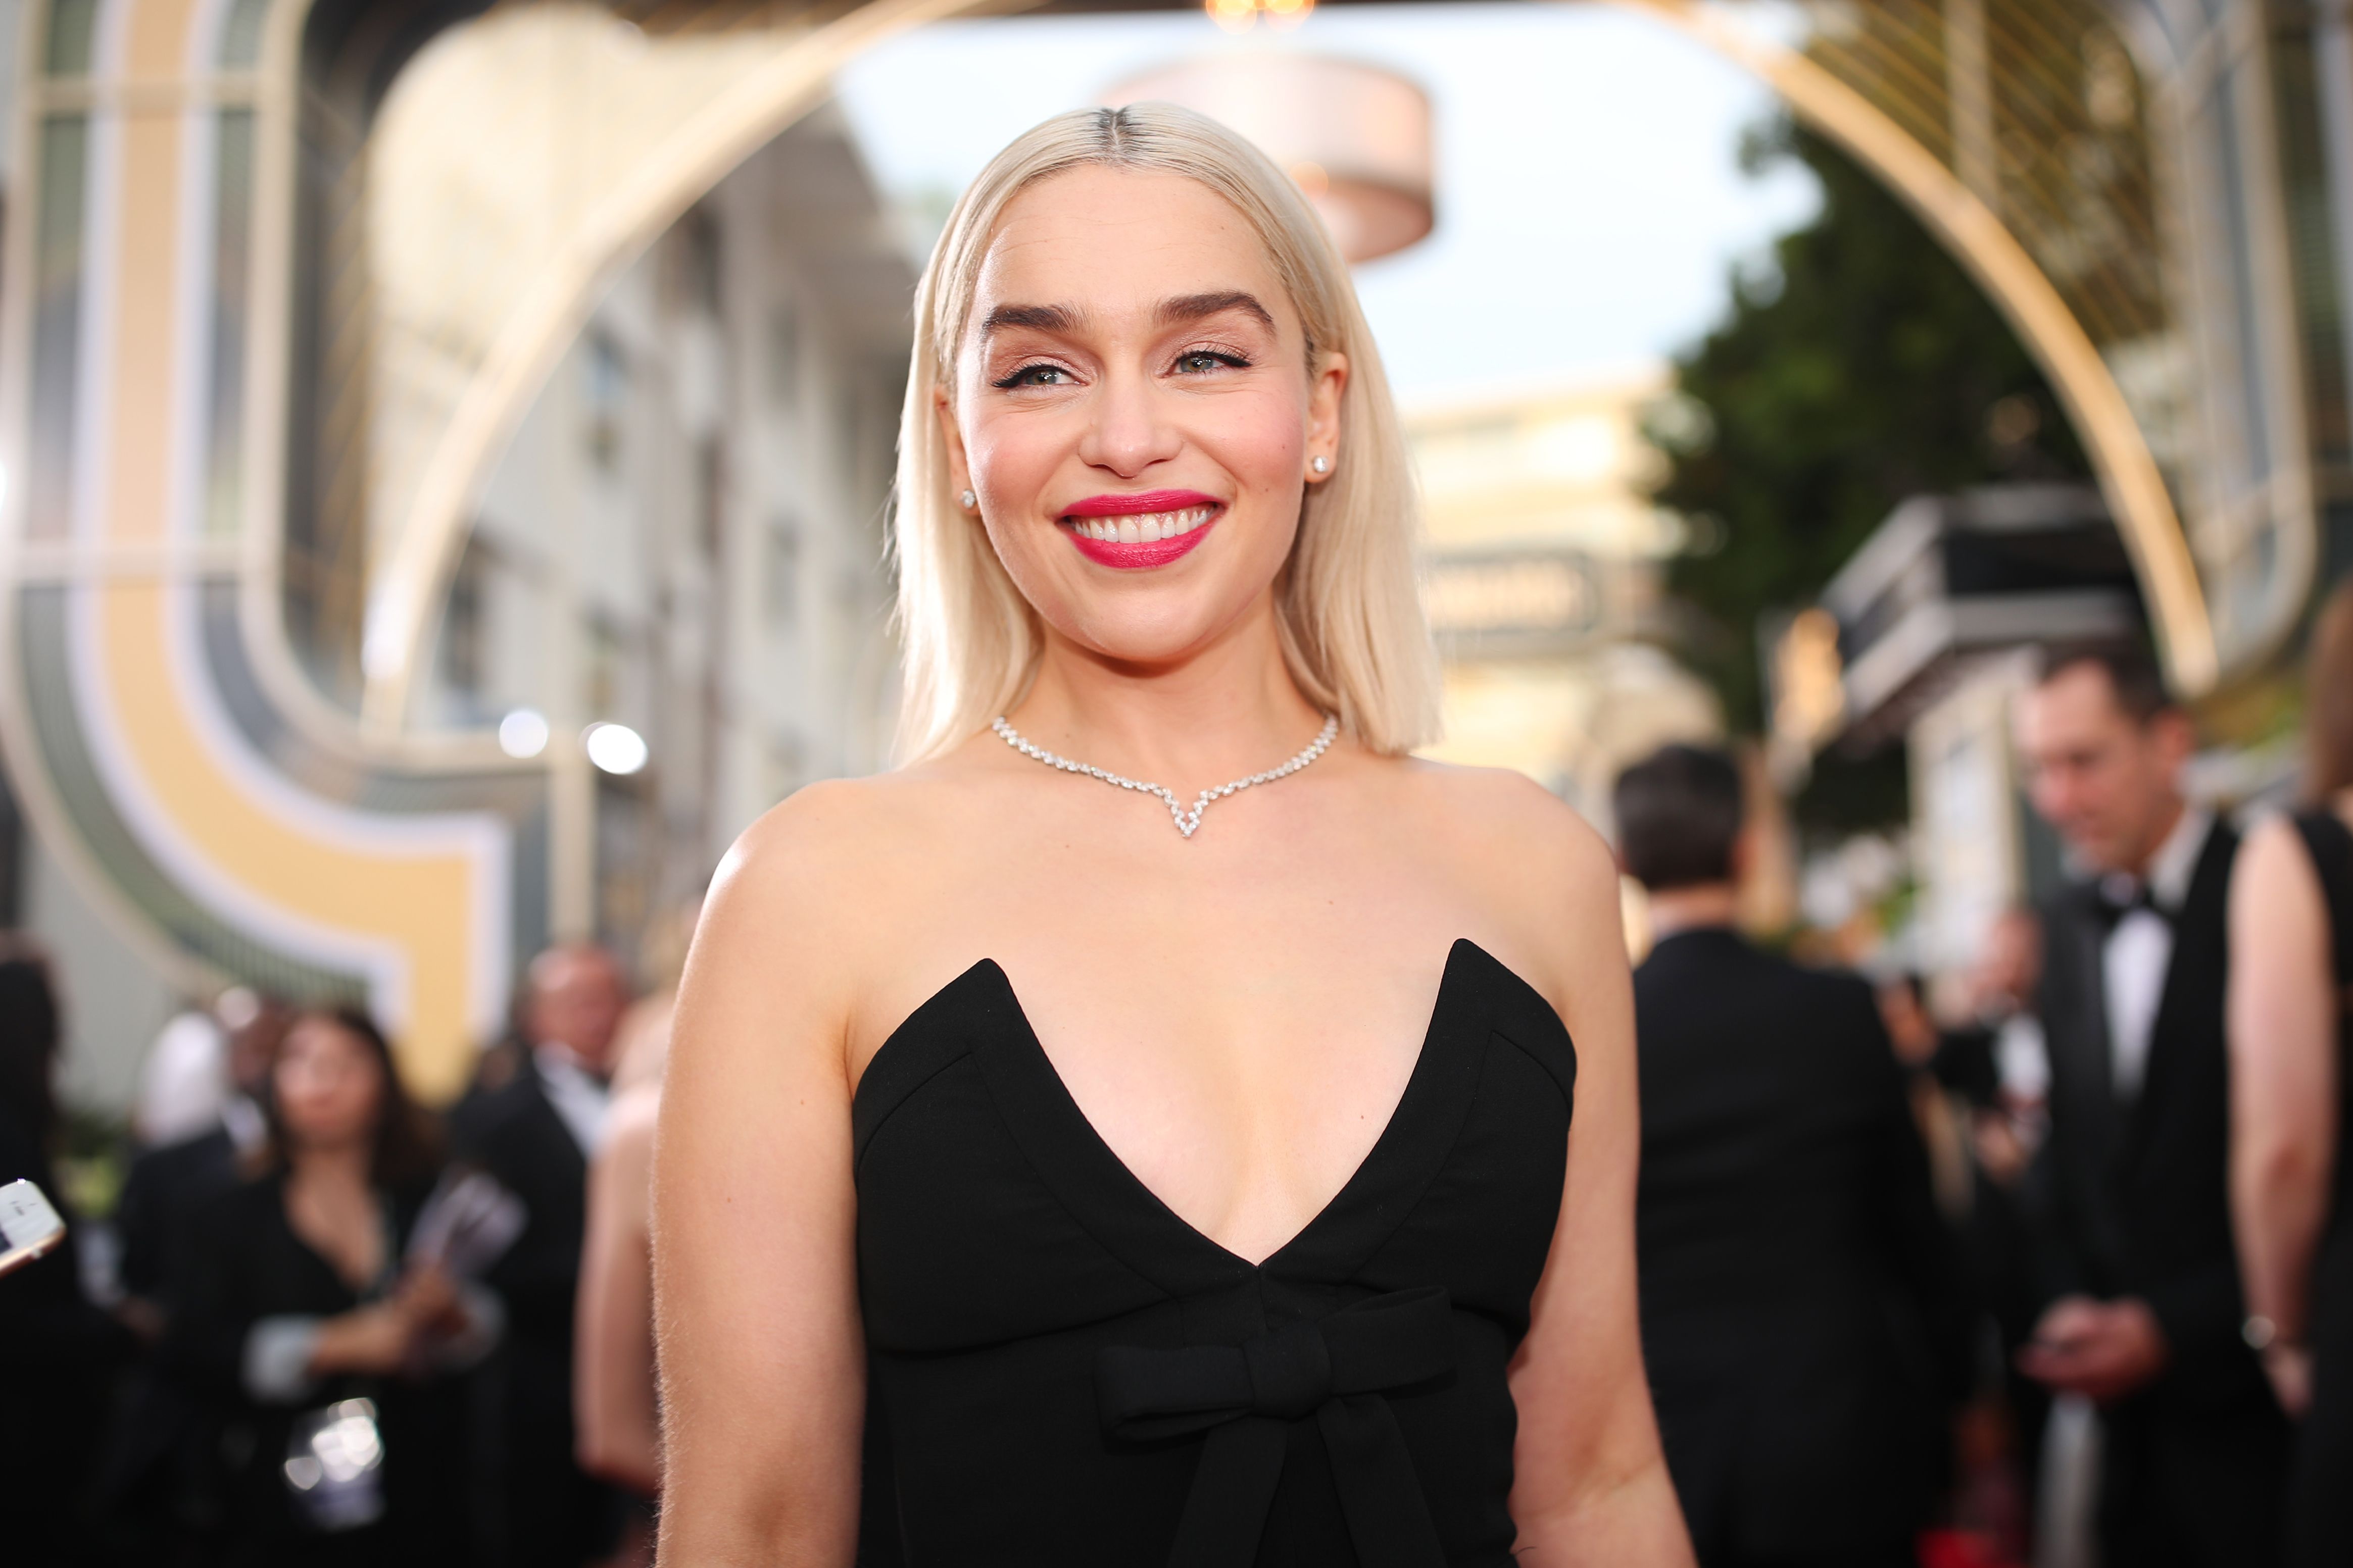 75th-annual-golden-globe-awards-pictured-actor-emilia-news-photo-1568848787.jpg